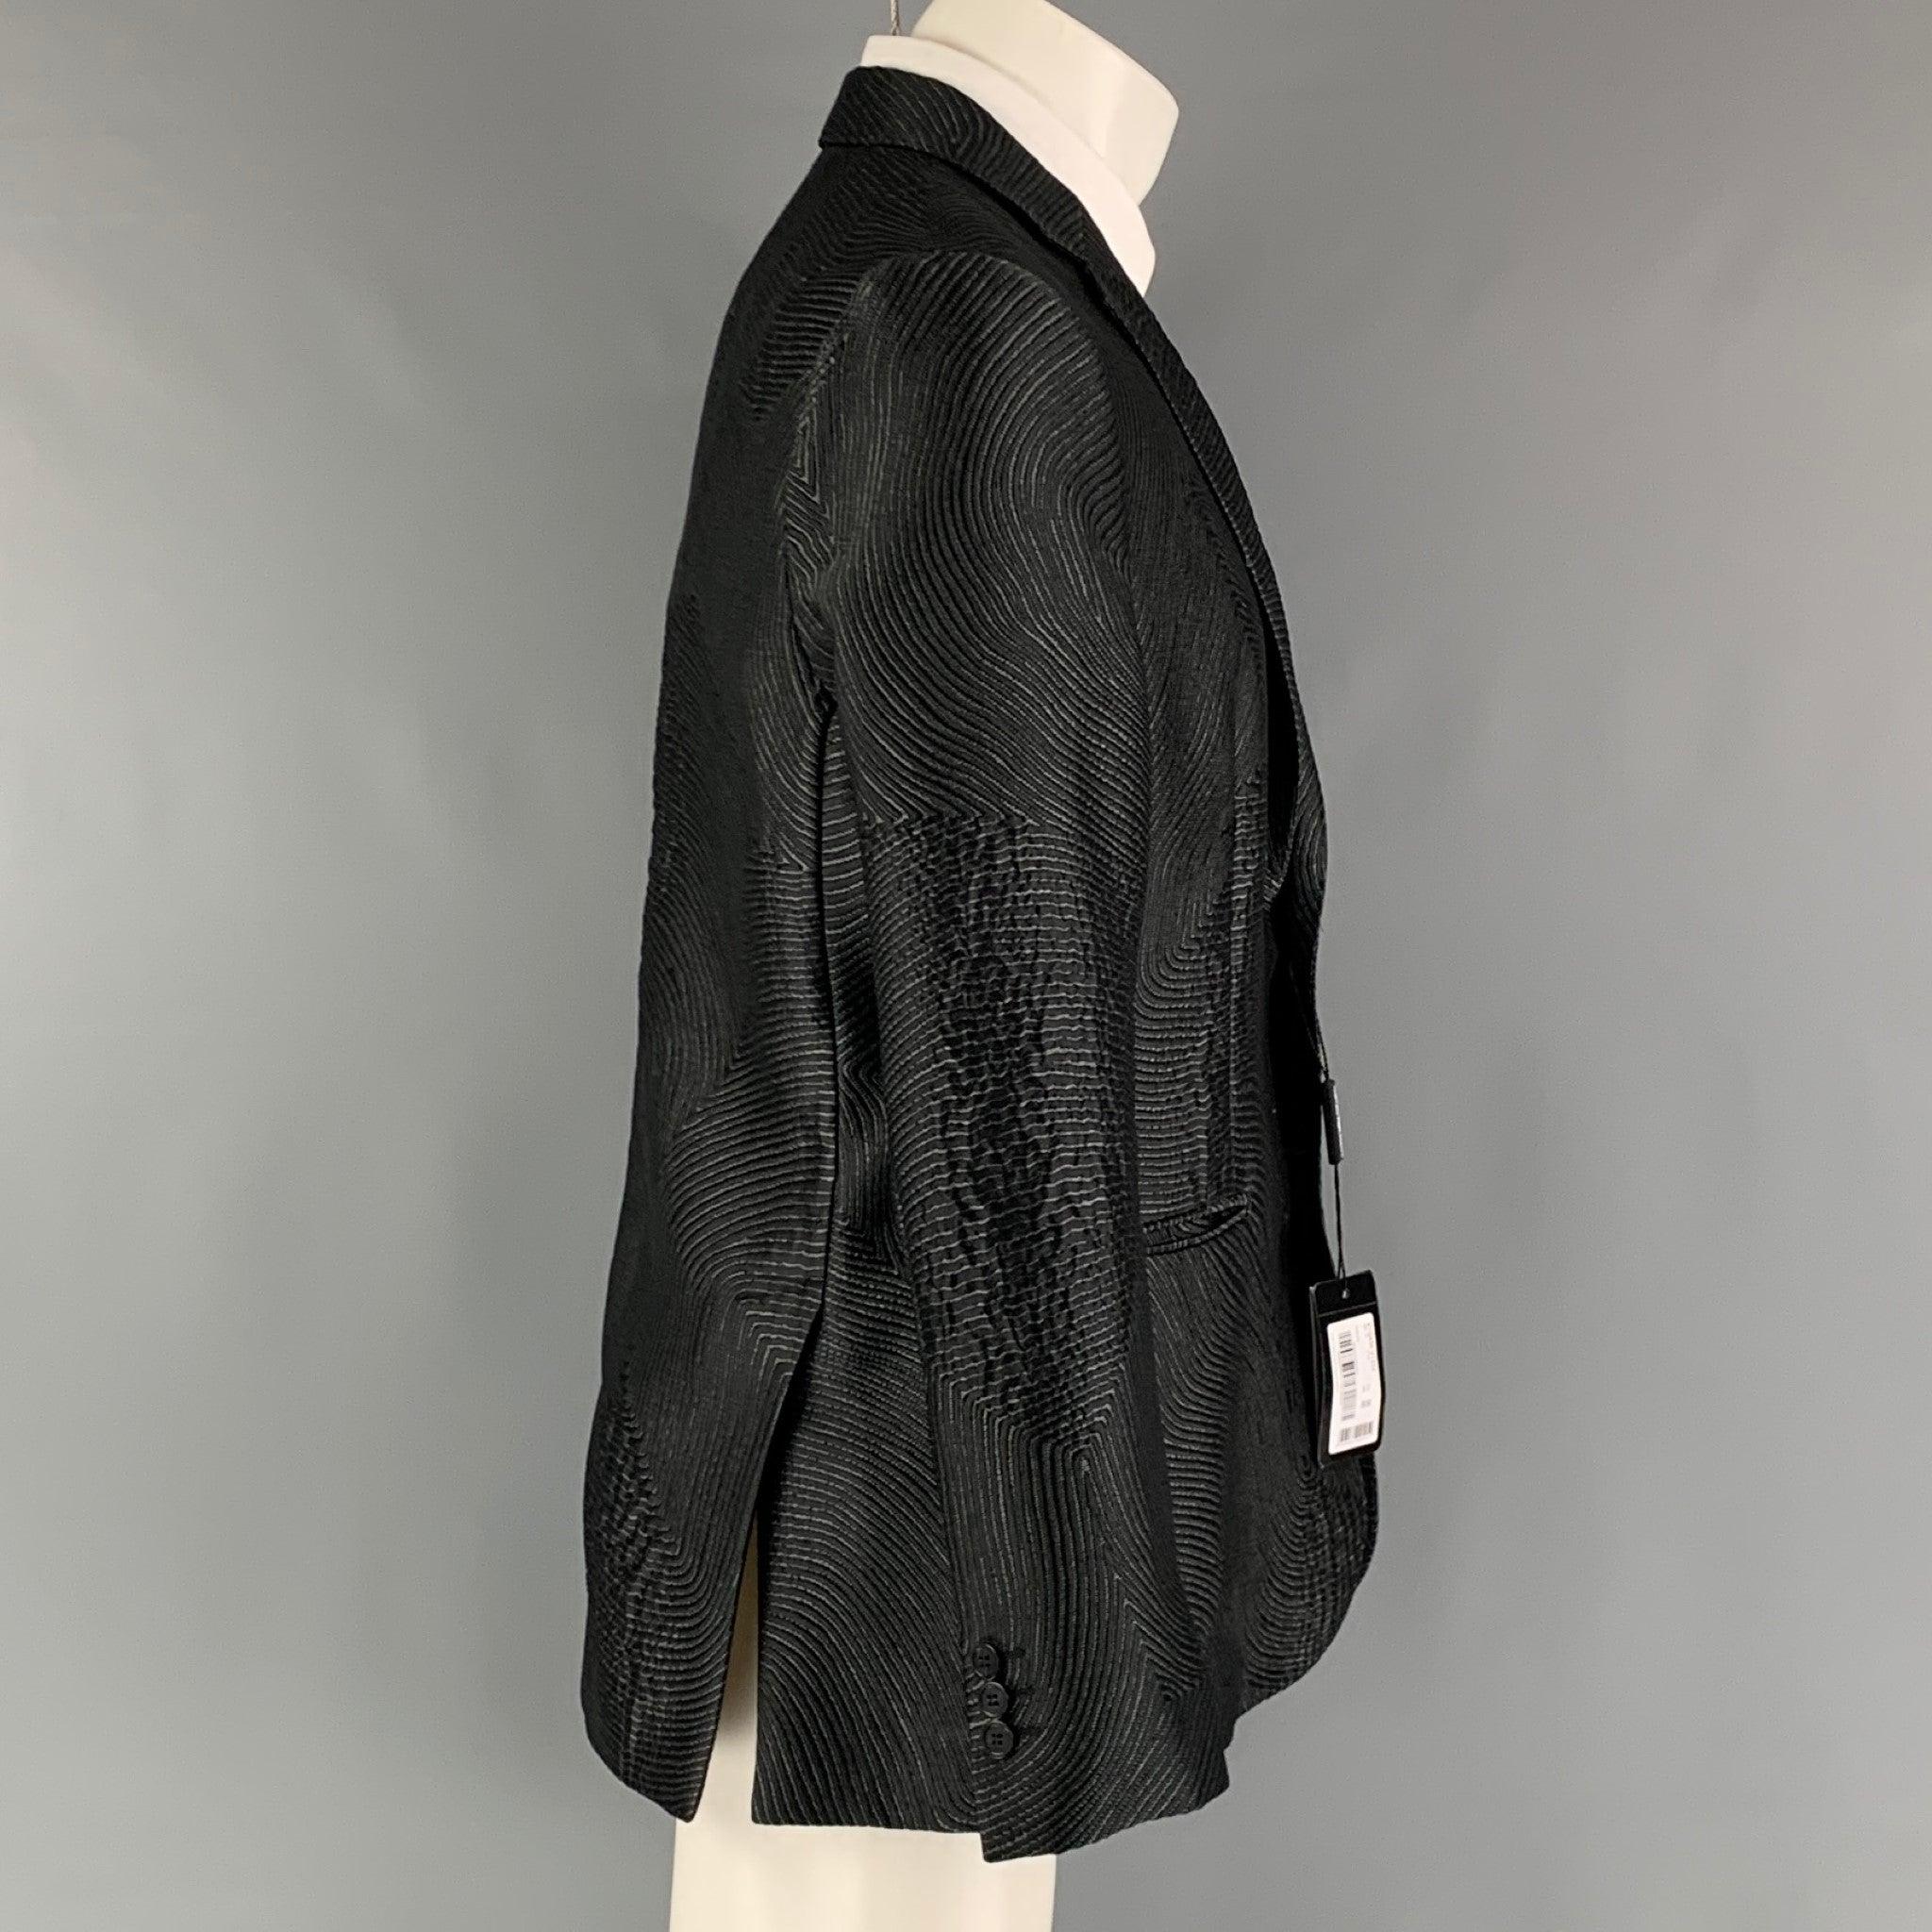 EMPORIO ARMANI sport coat comes in a black and grey jacquard polyester blend woven material with no lining featuring a notch lapel, welt pockets, and a two button closure. Made in Italy. New with Tags. 

Marked:   50 

Measurements: 
 
Shoulder: 17